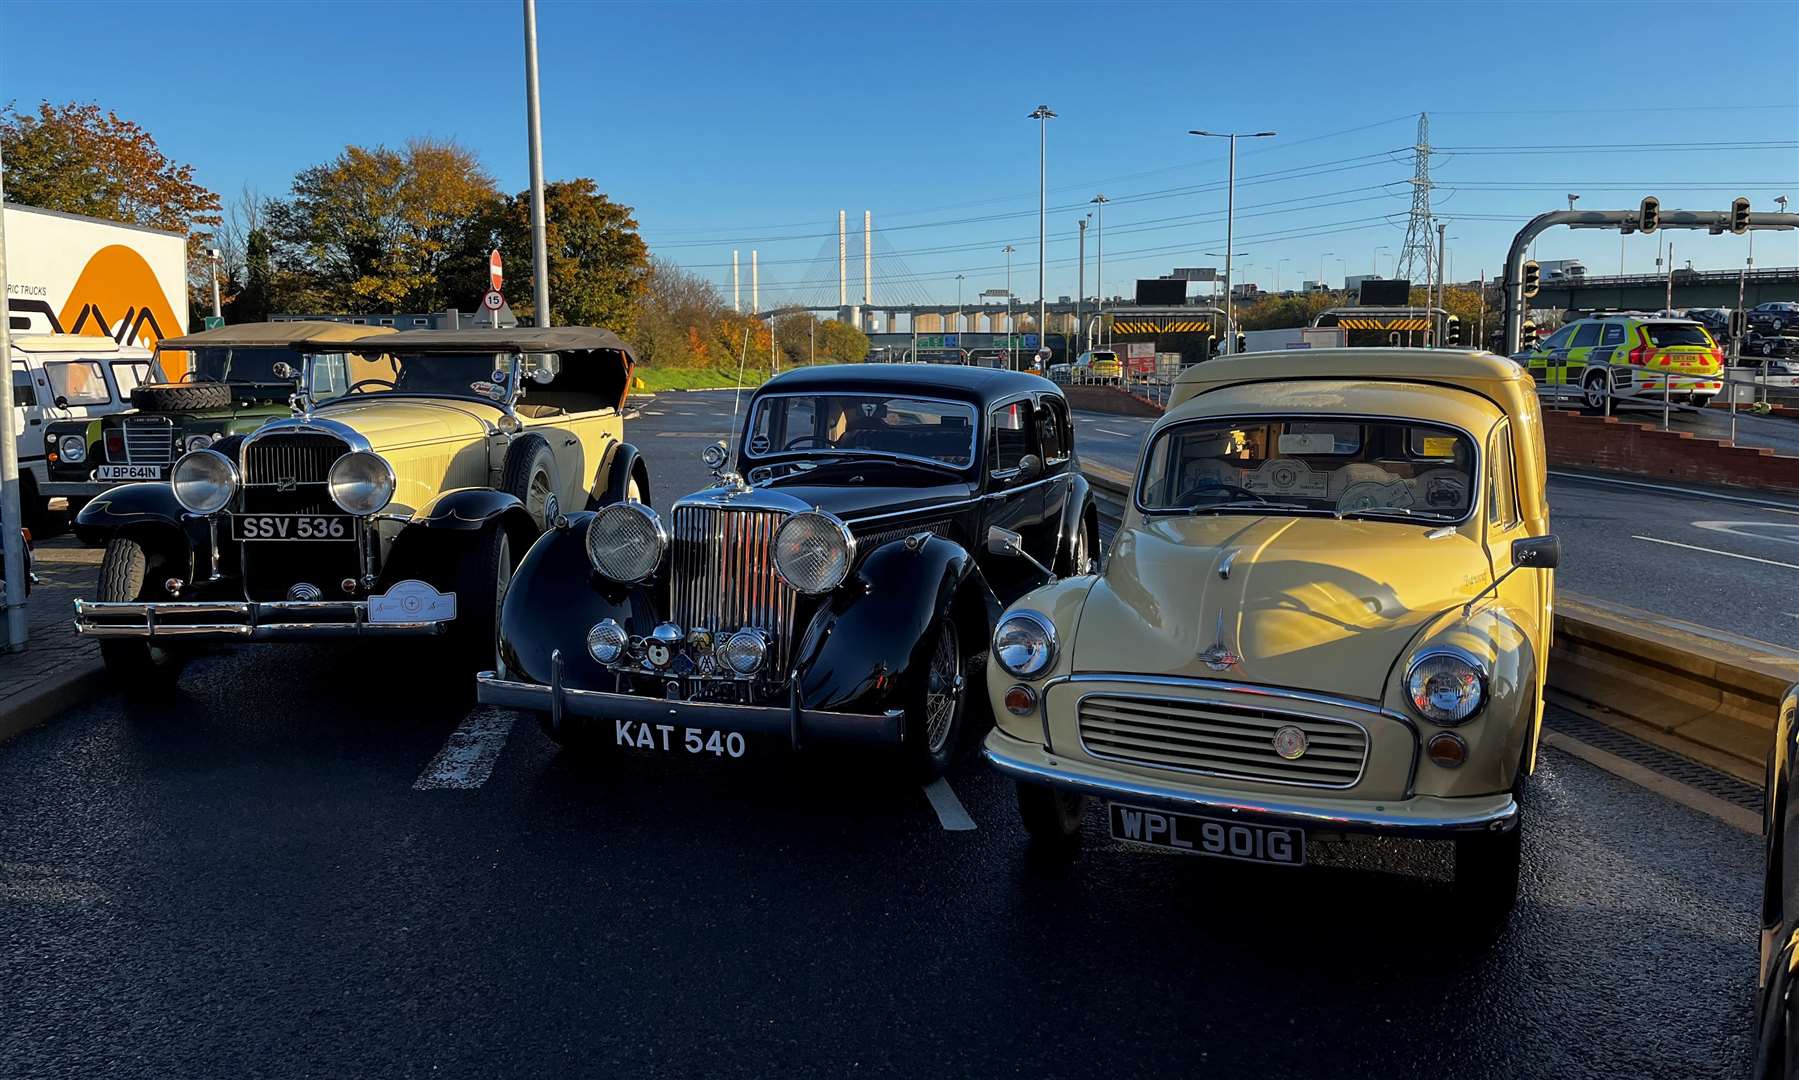 The vintage car parade helped celebrate the Dartford Crossing's 60th birthday